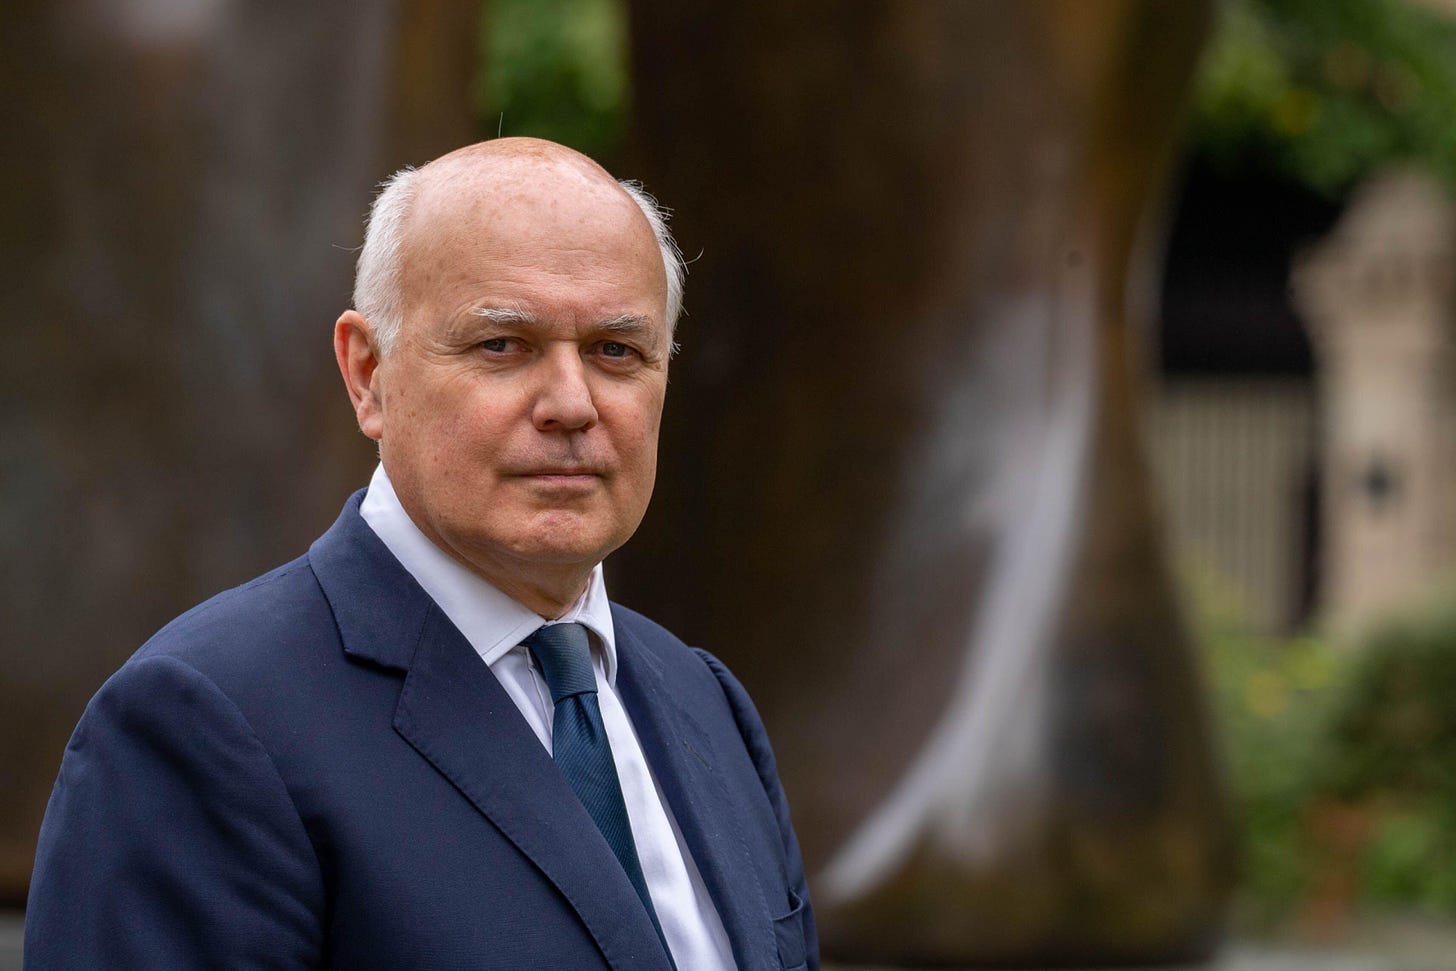 China is targeting me, says Iain Duncan Smith